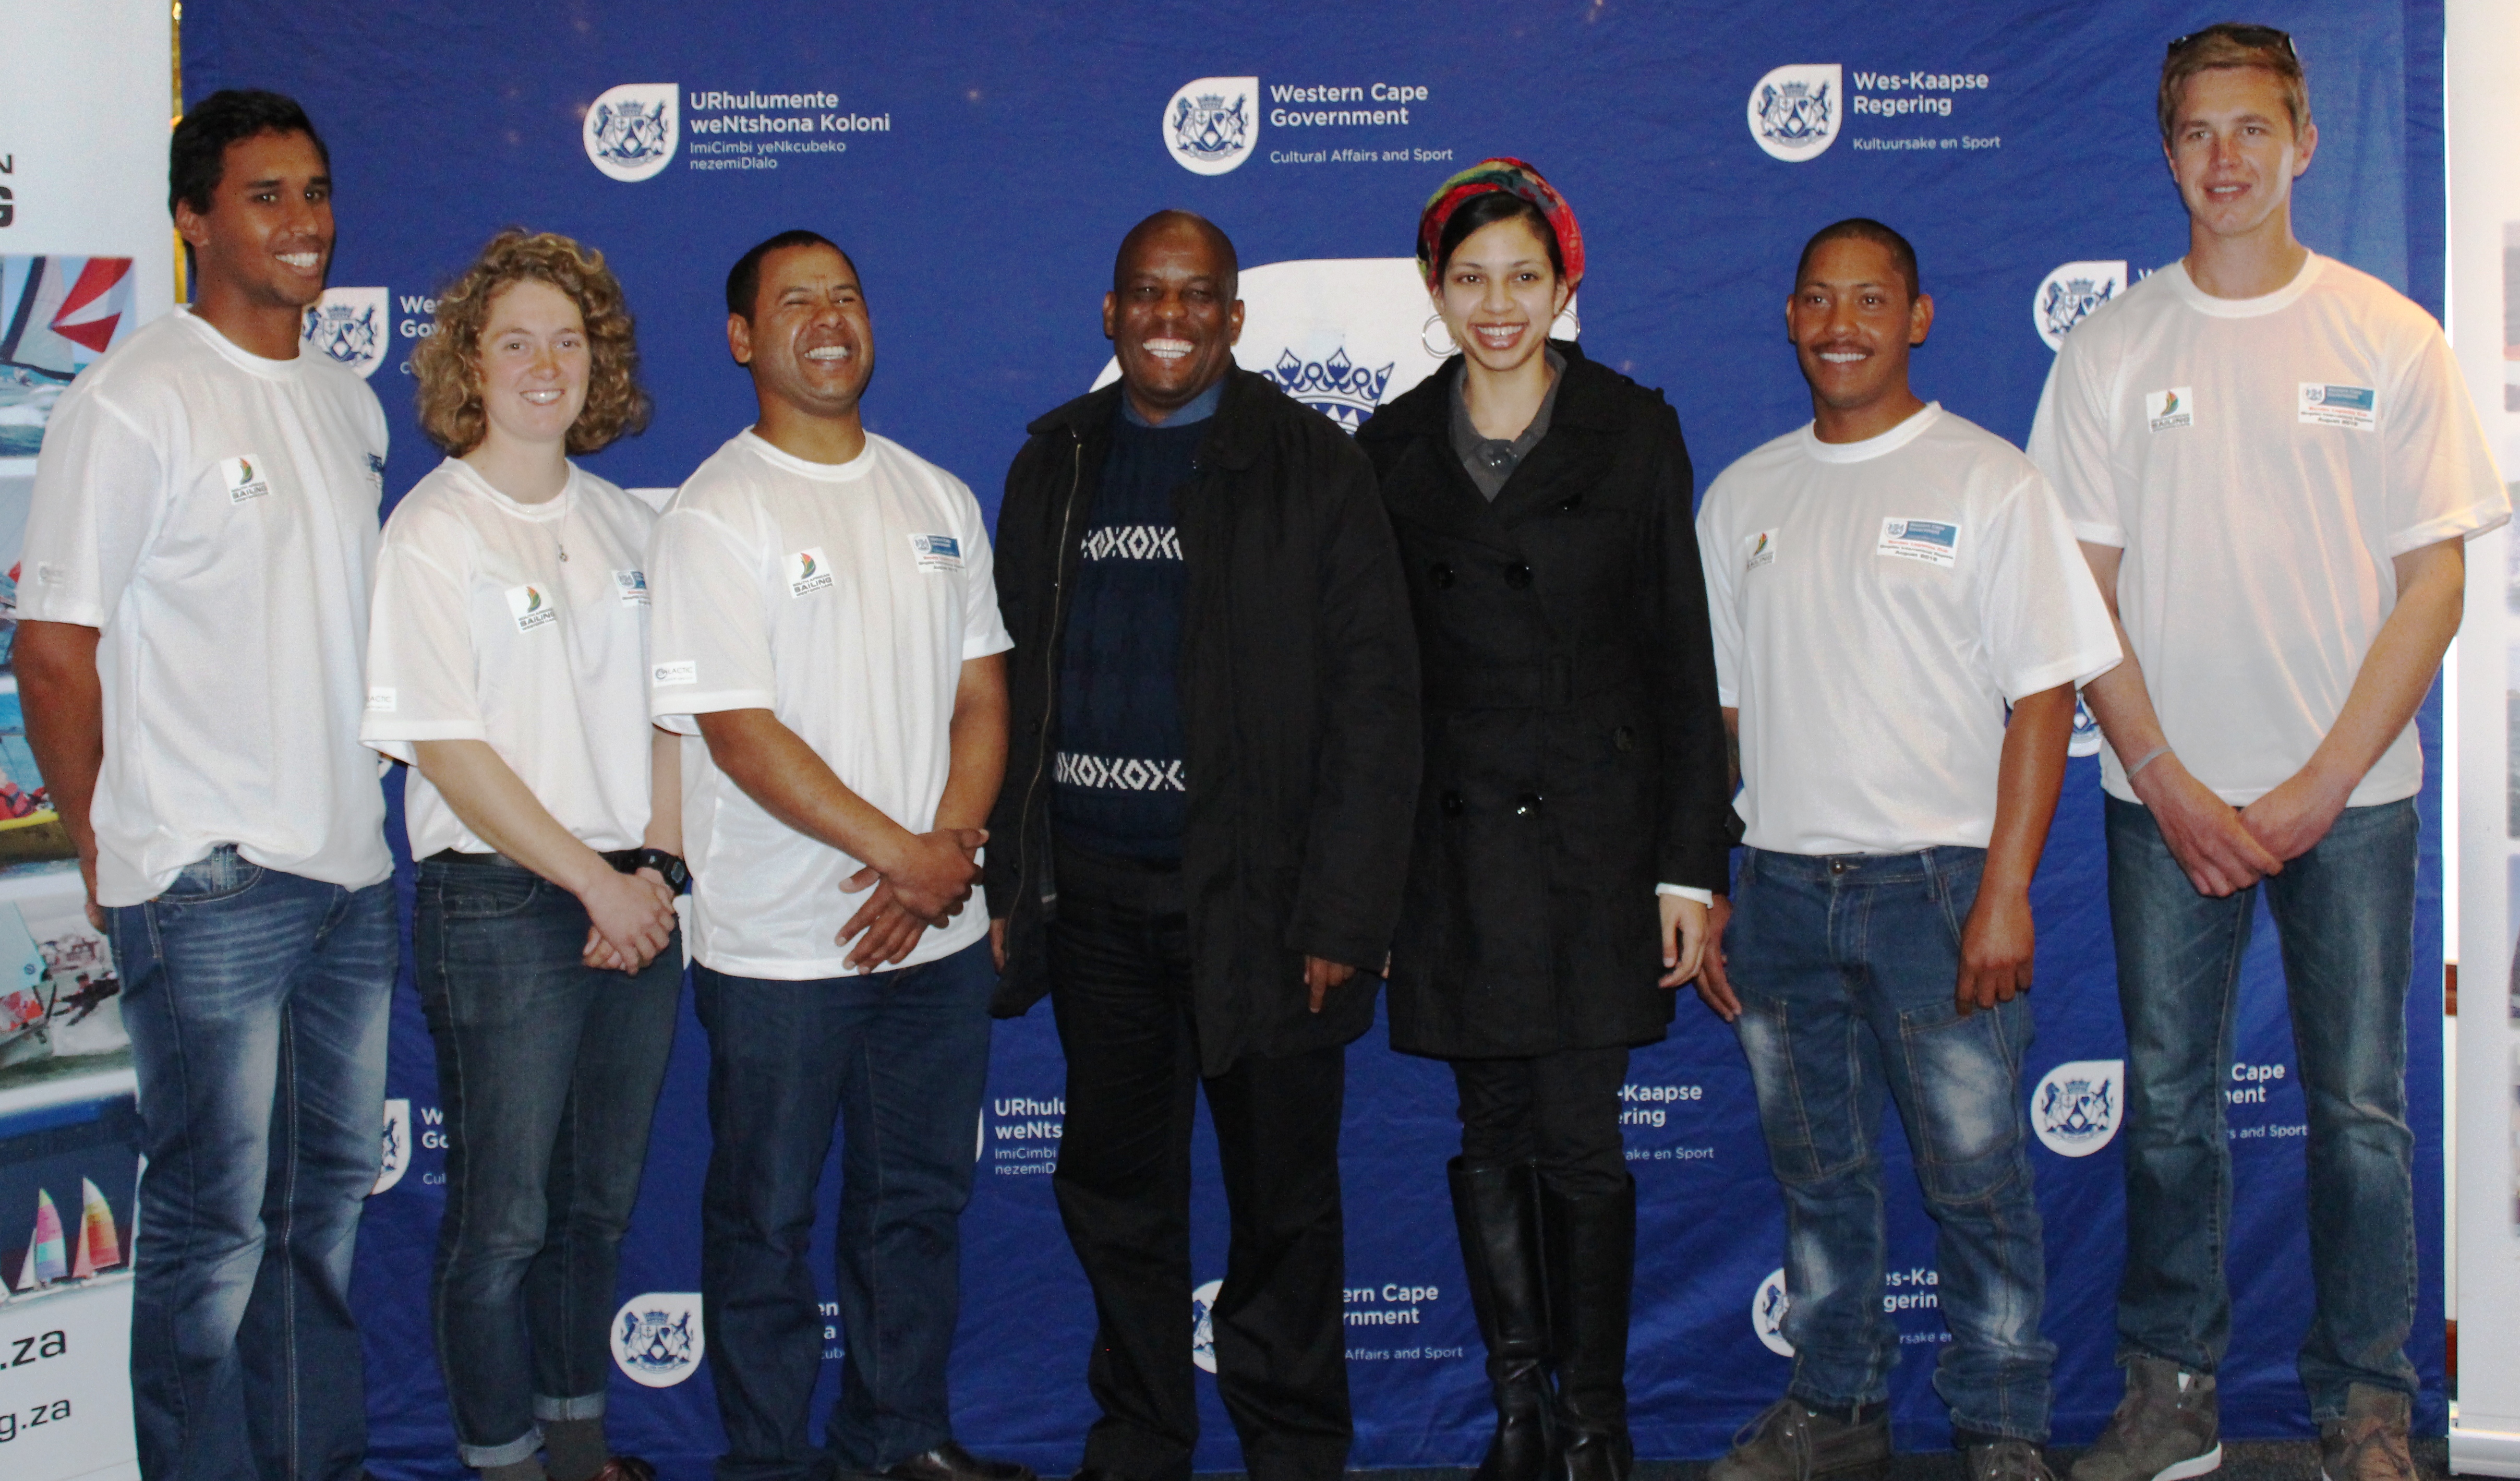 The WC delegation with DCAS Director for Sport Promotion Thabo Tutu and Zaghra Savahl in the centre.